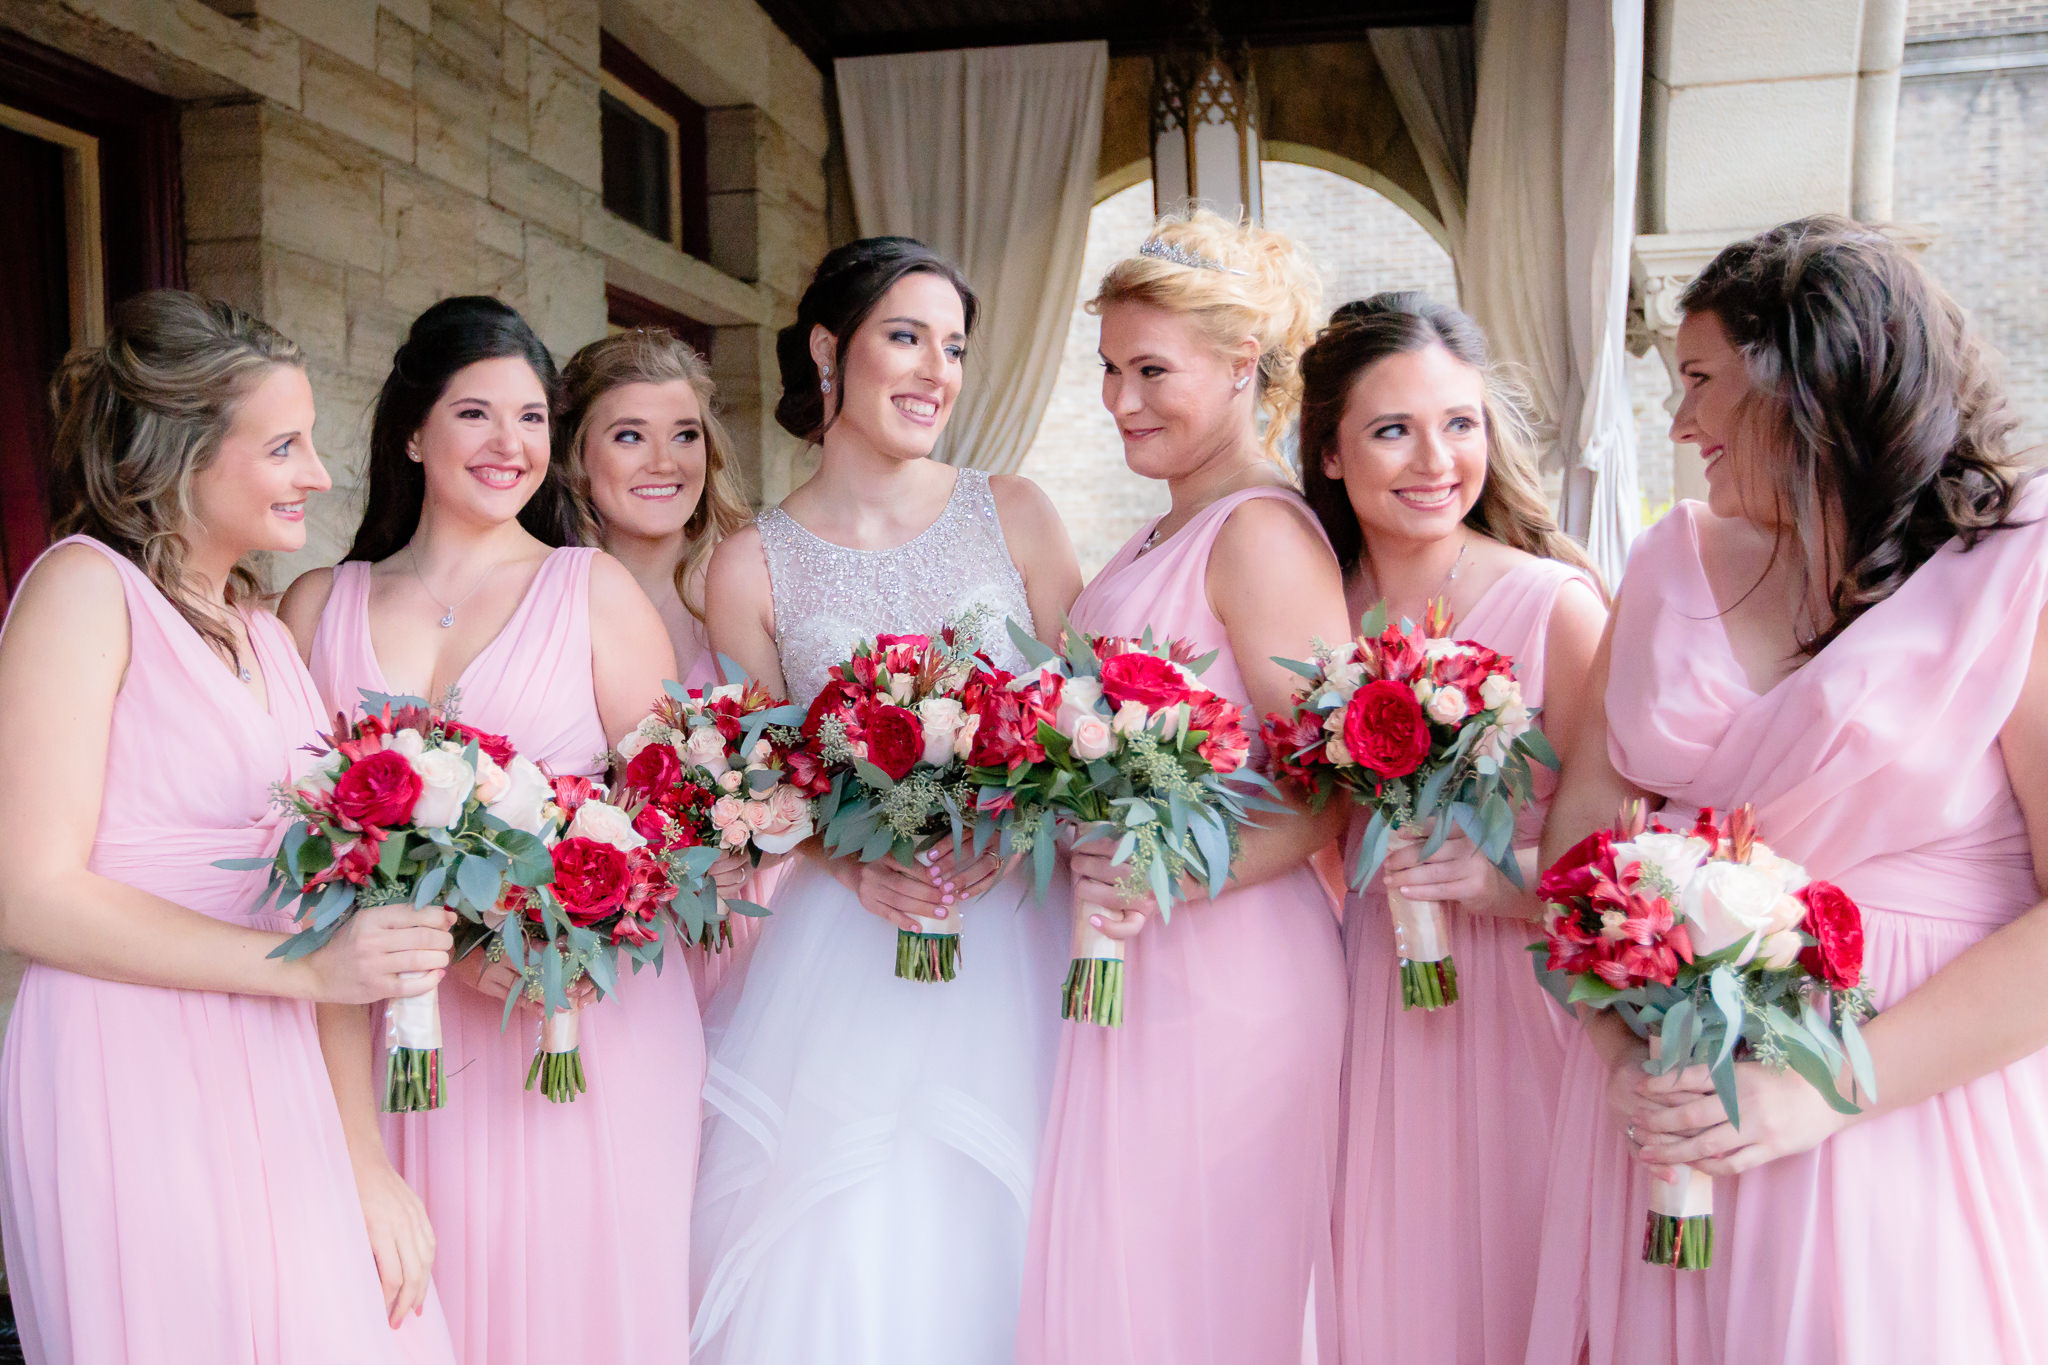 Bridesmaids laugh with the bride before a LeMont wedding